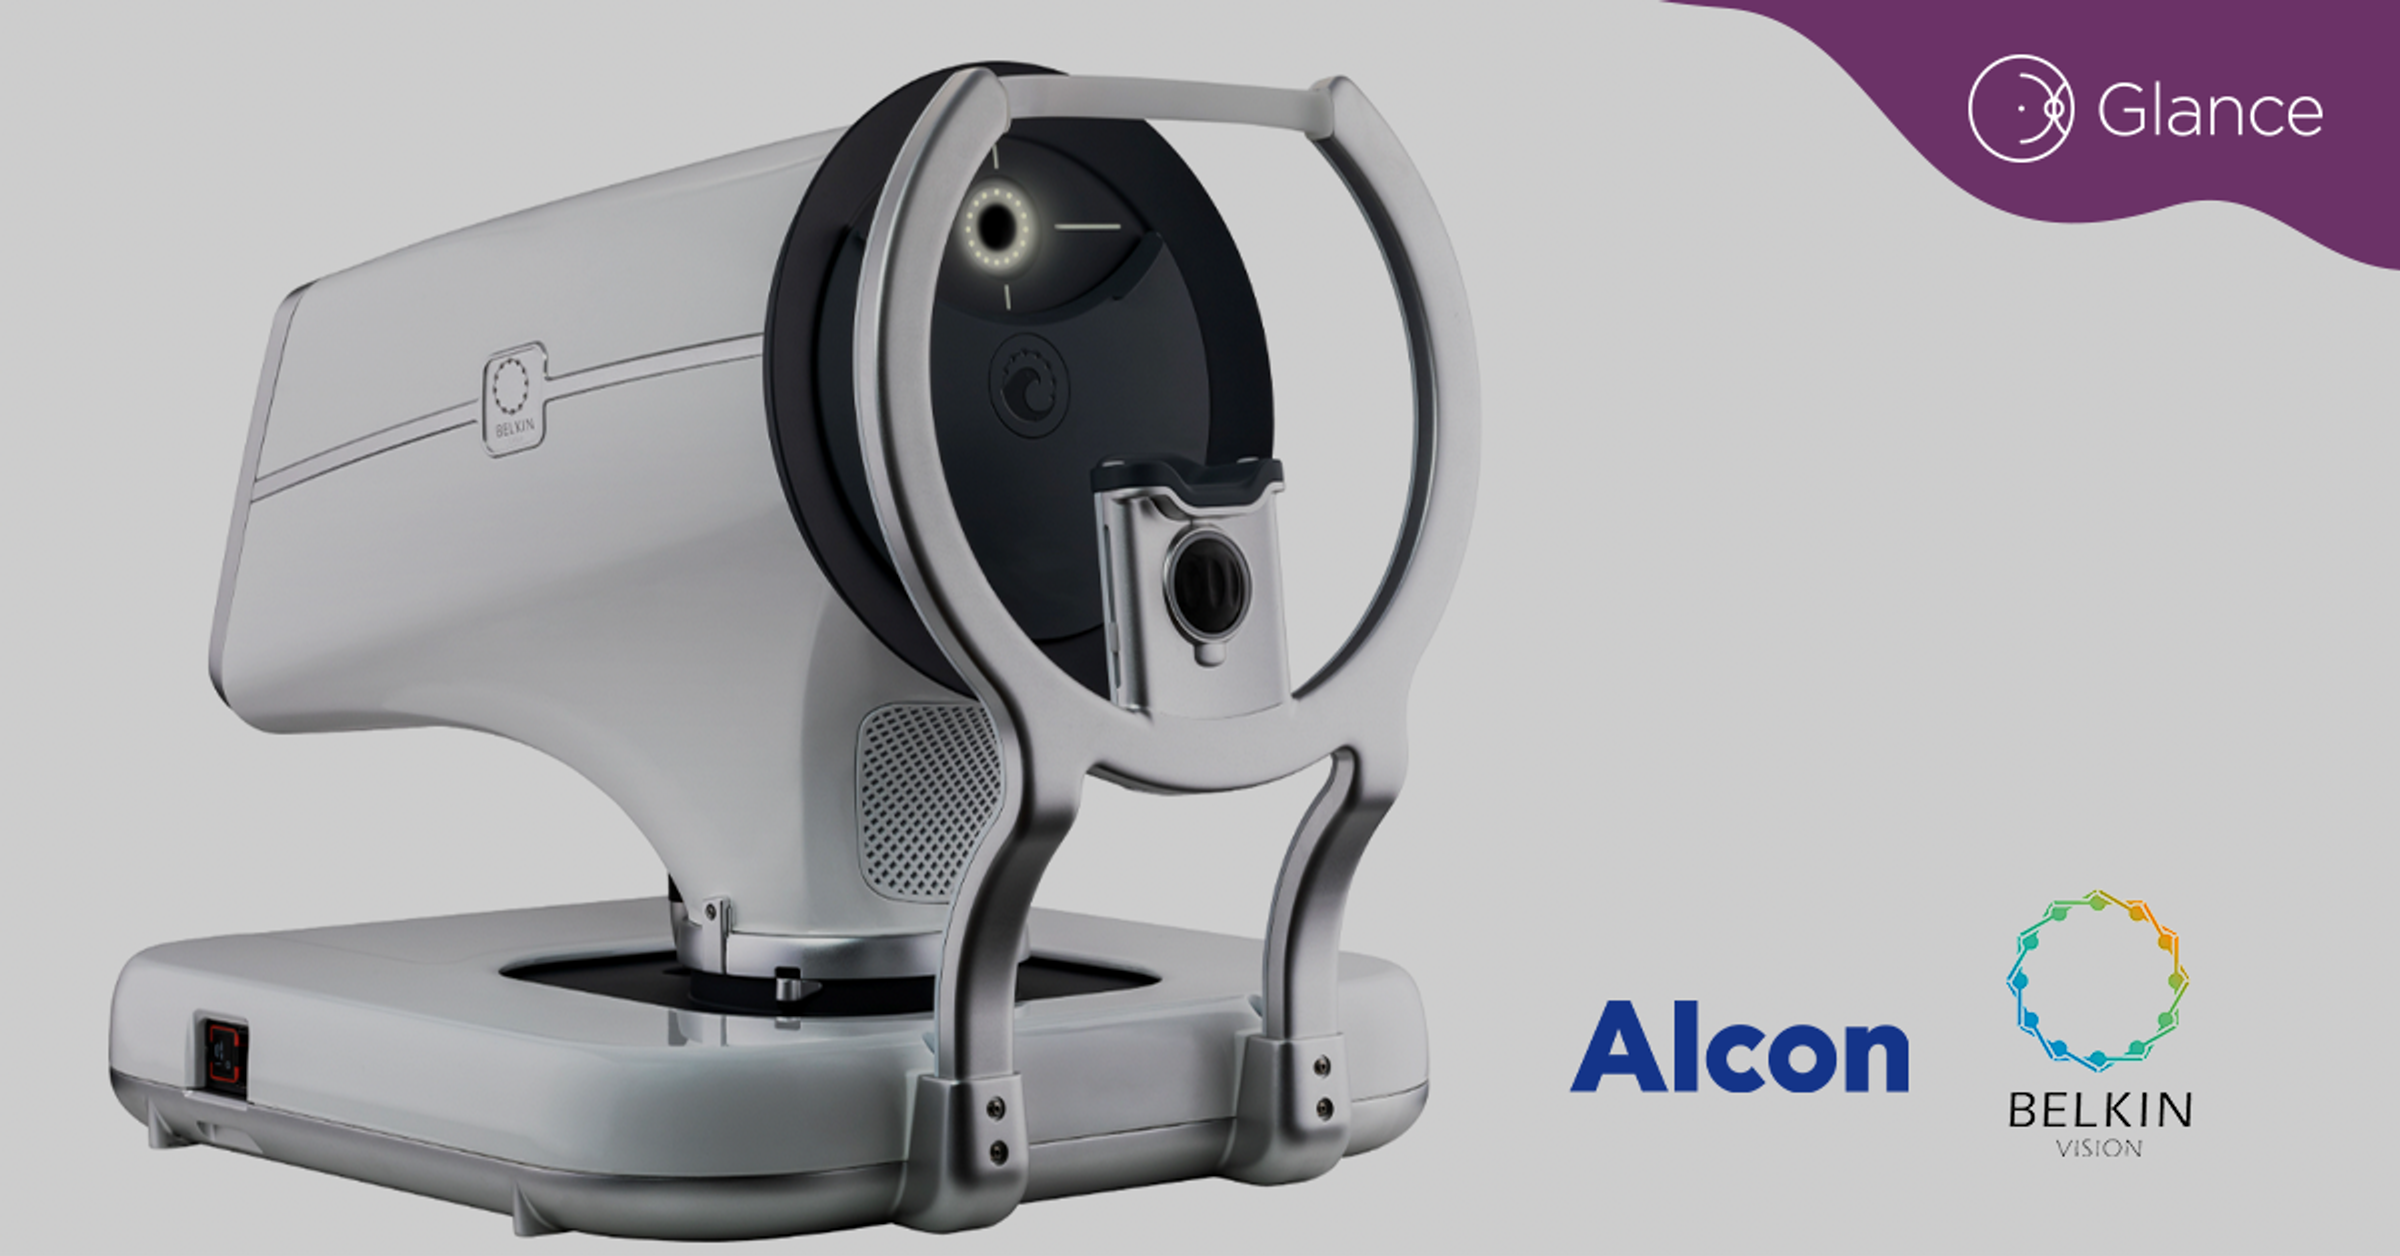 Alcon is buying Belkin Vision and its contact-less SLT glaucoma device